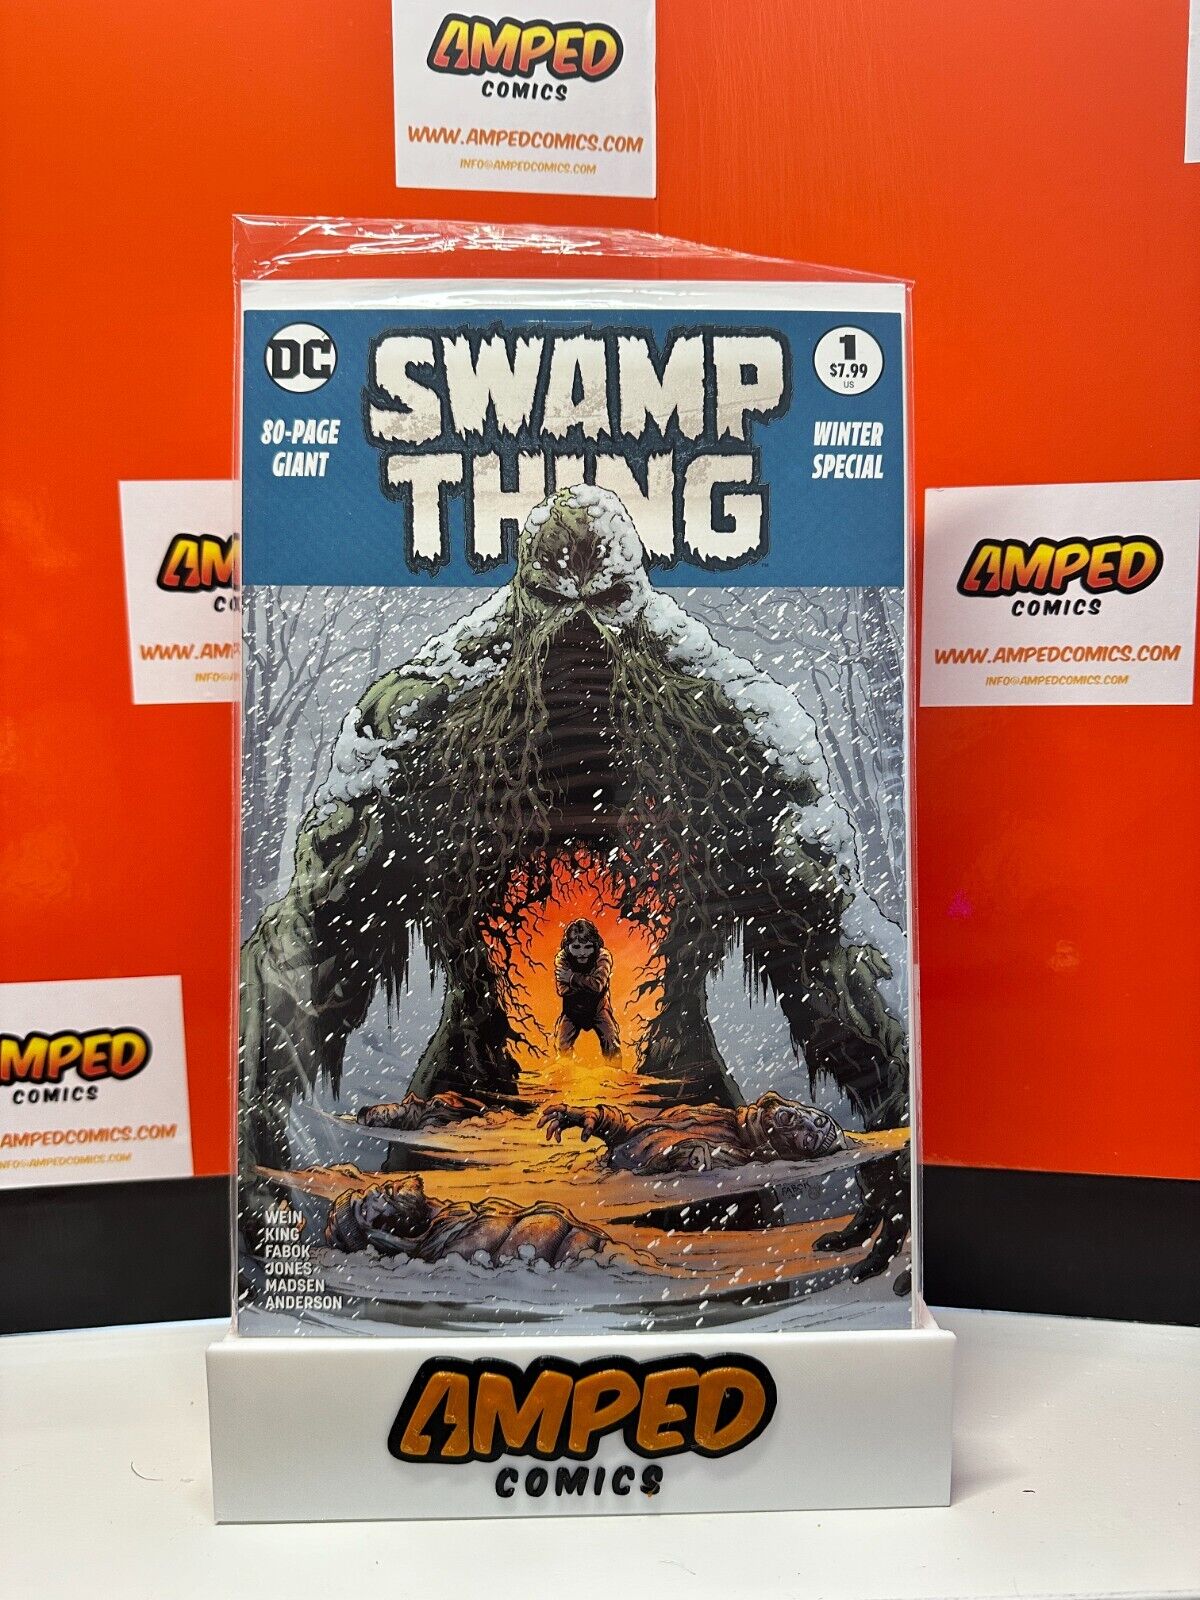 SWAMP THING WINTER SPECIAL # 1 FIRST PRINT 2018